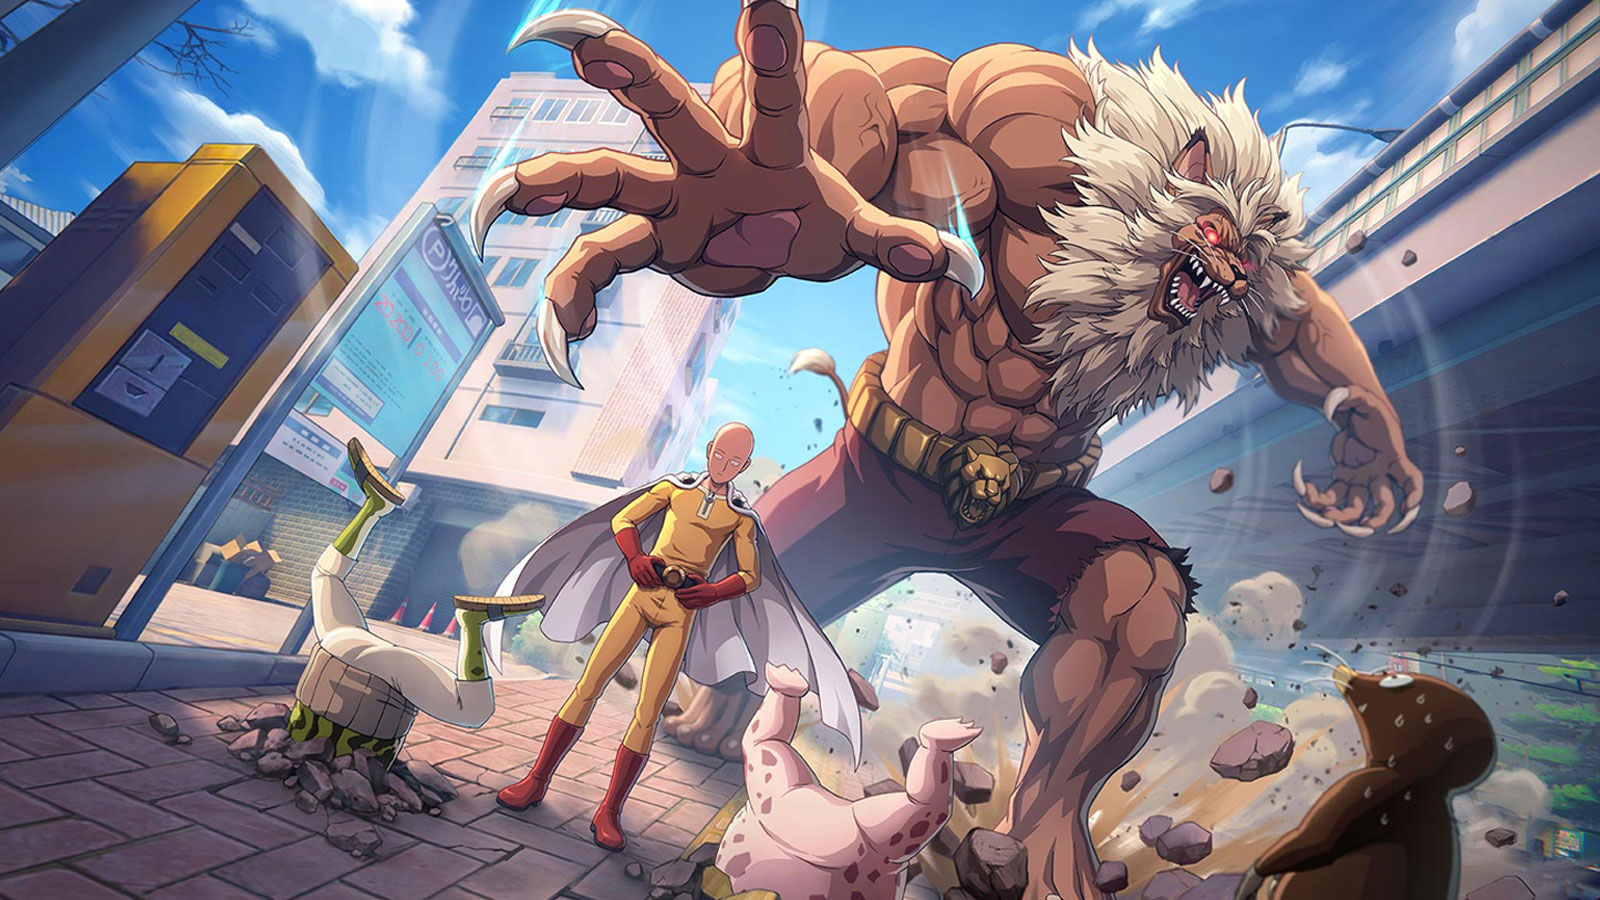 A new 'One Punch Man' video game is on the way